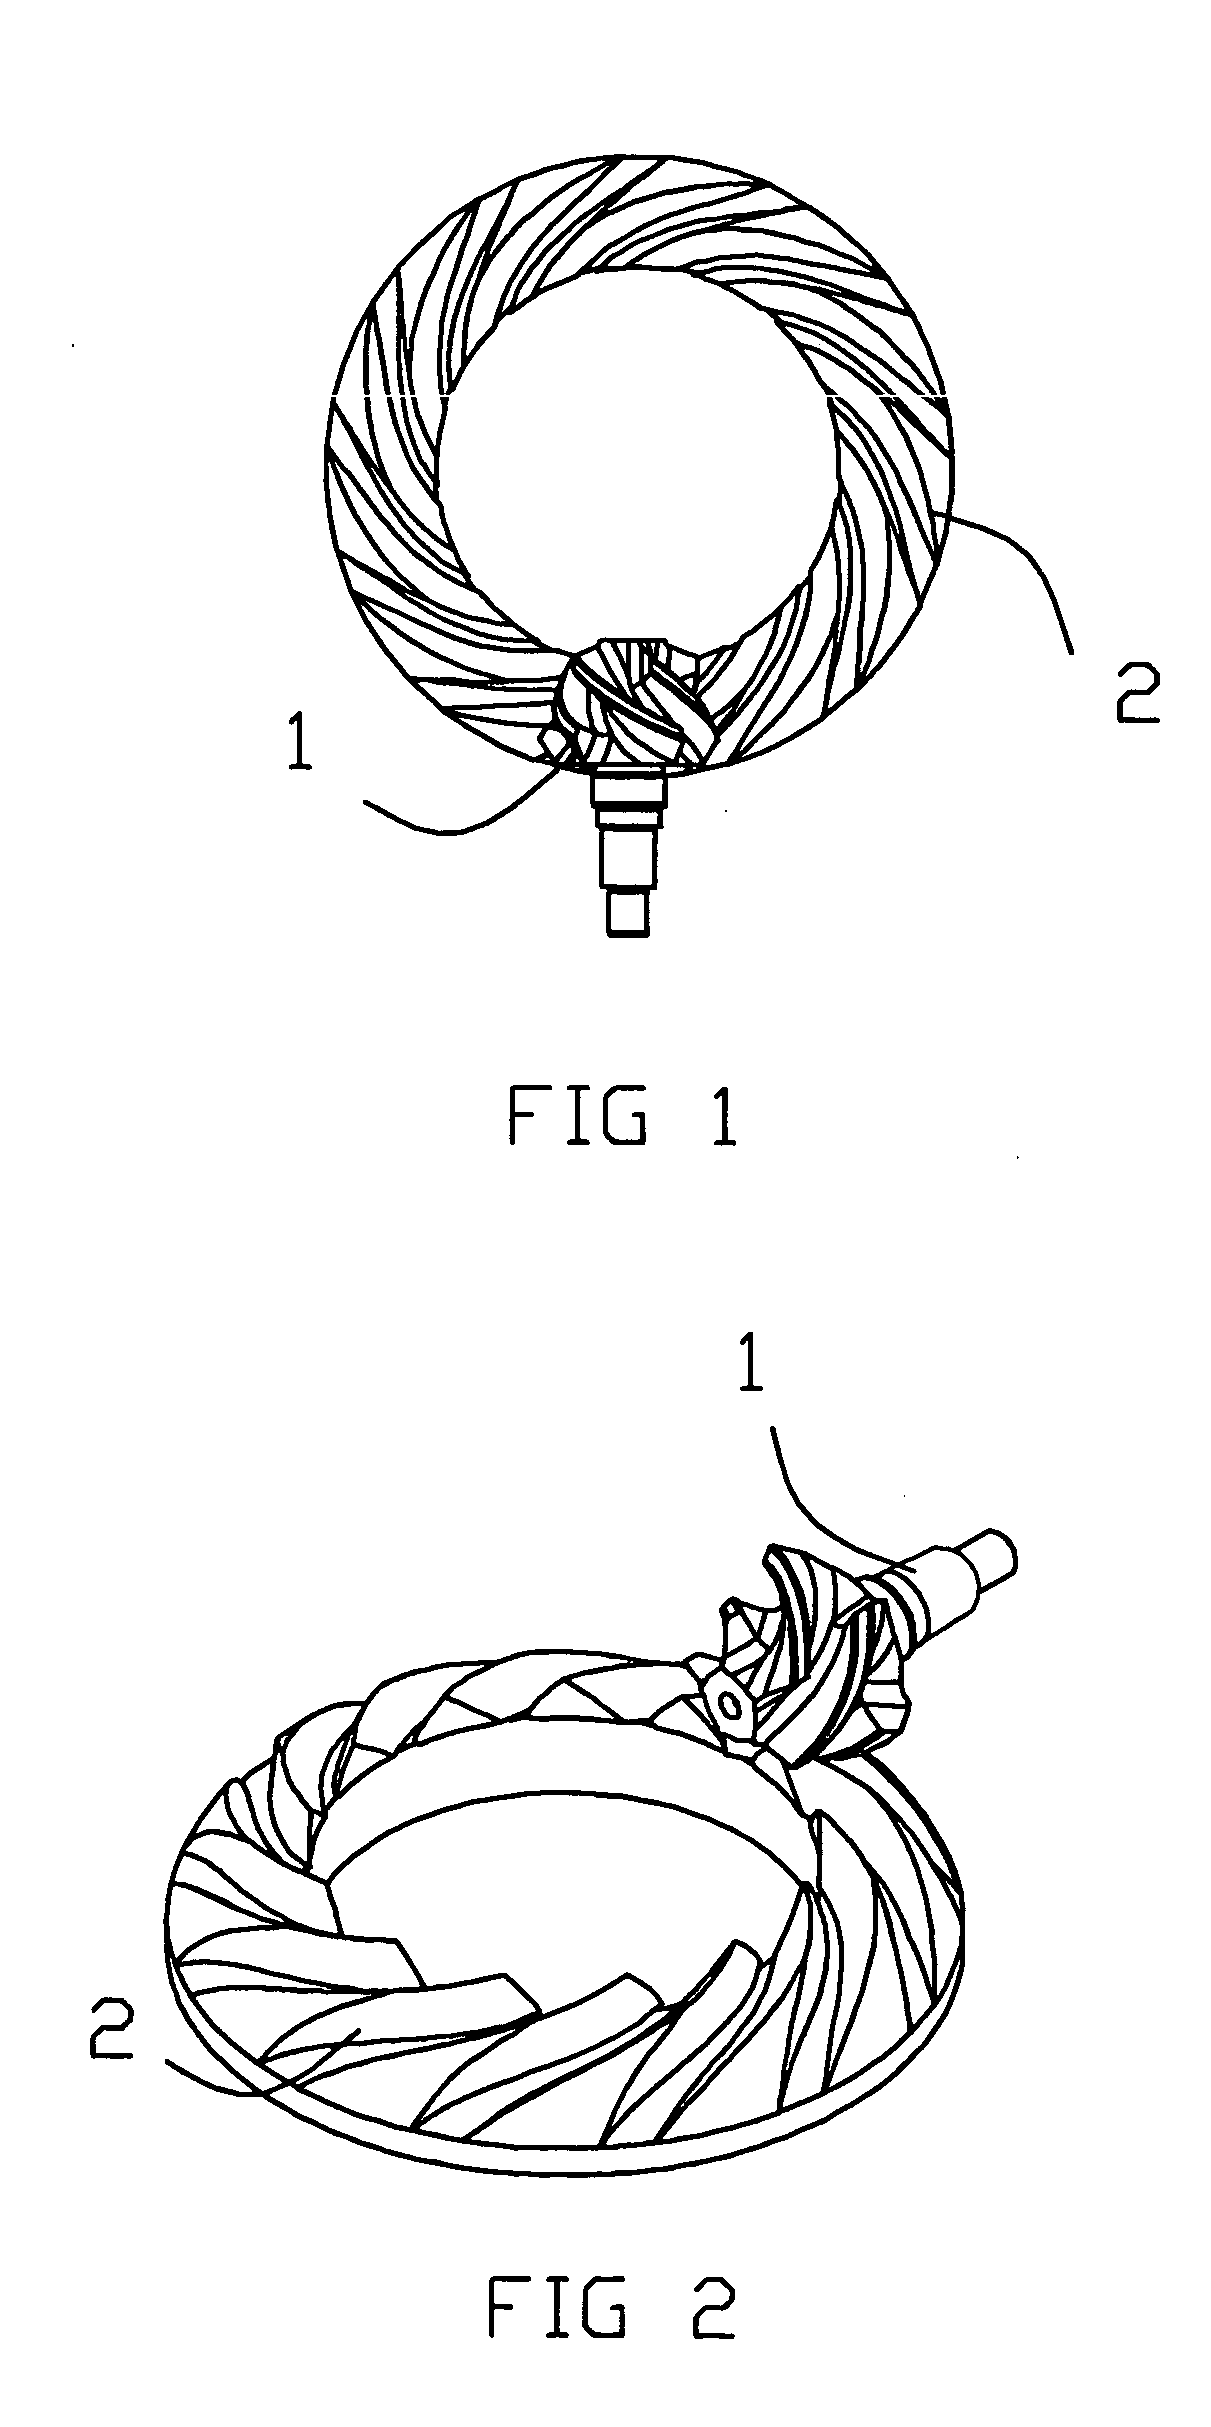 Drive axle assembly and differential